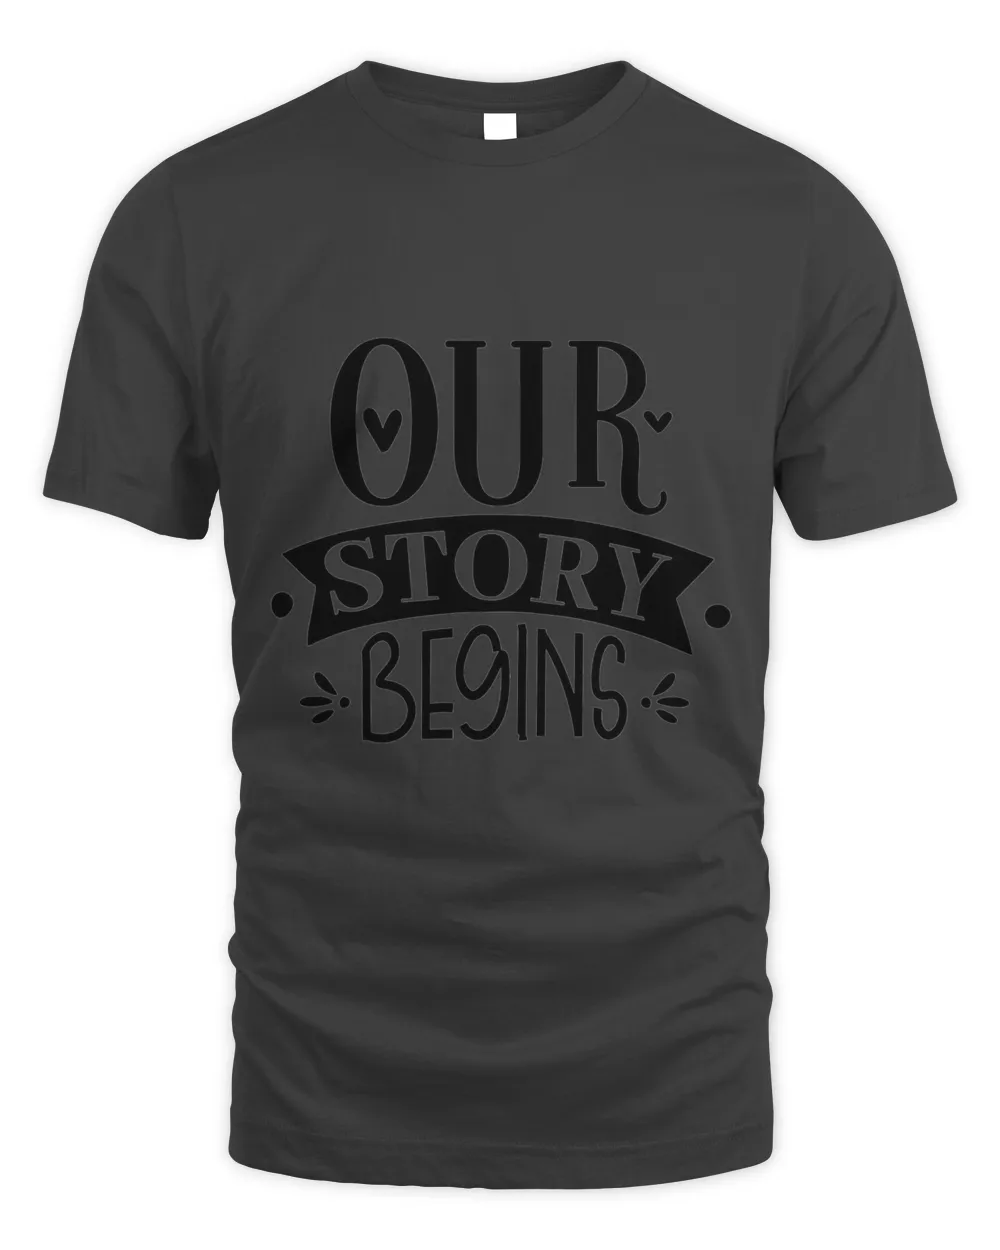 Our Story Begins on Christmas, Men's & Women's Merry Christmas Shirt